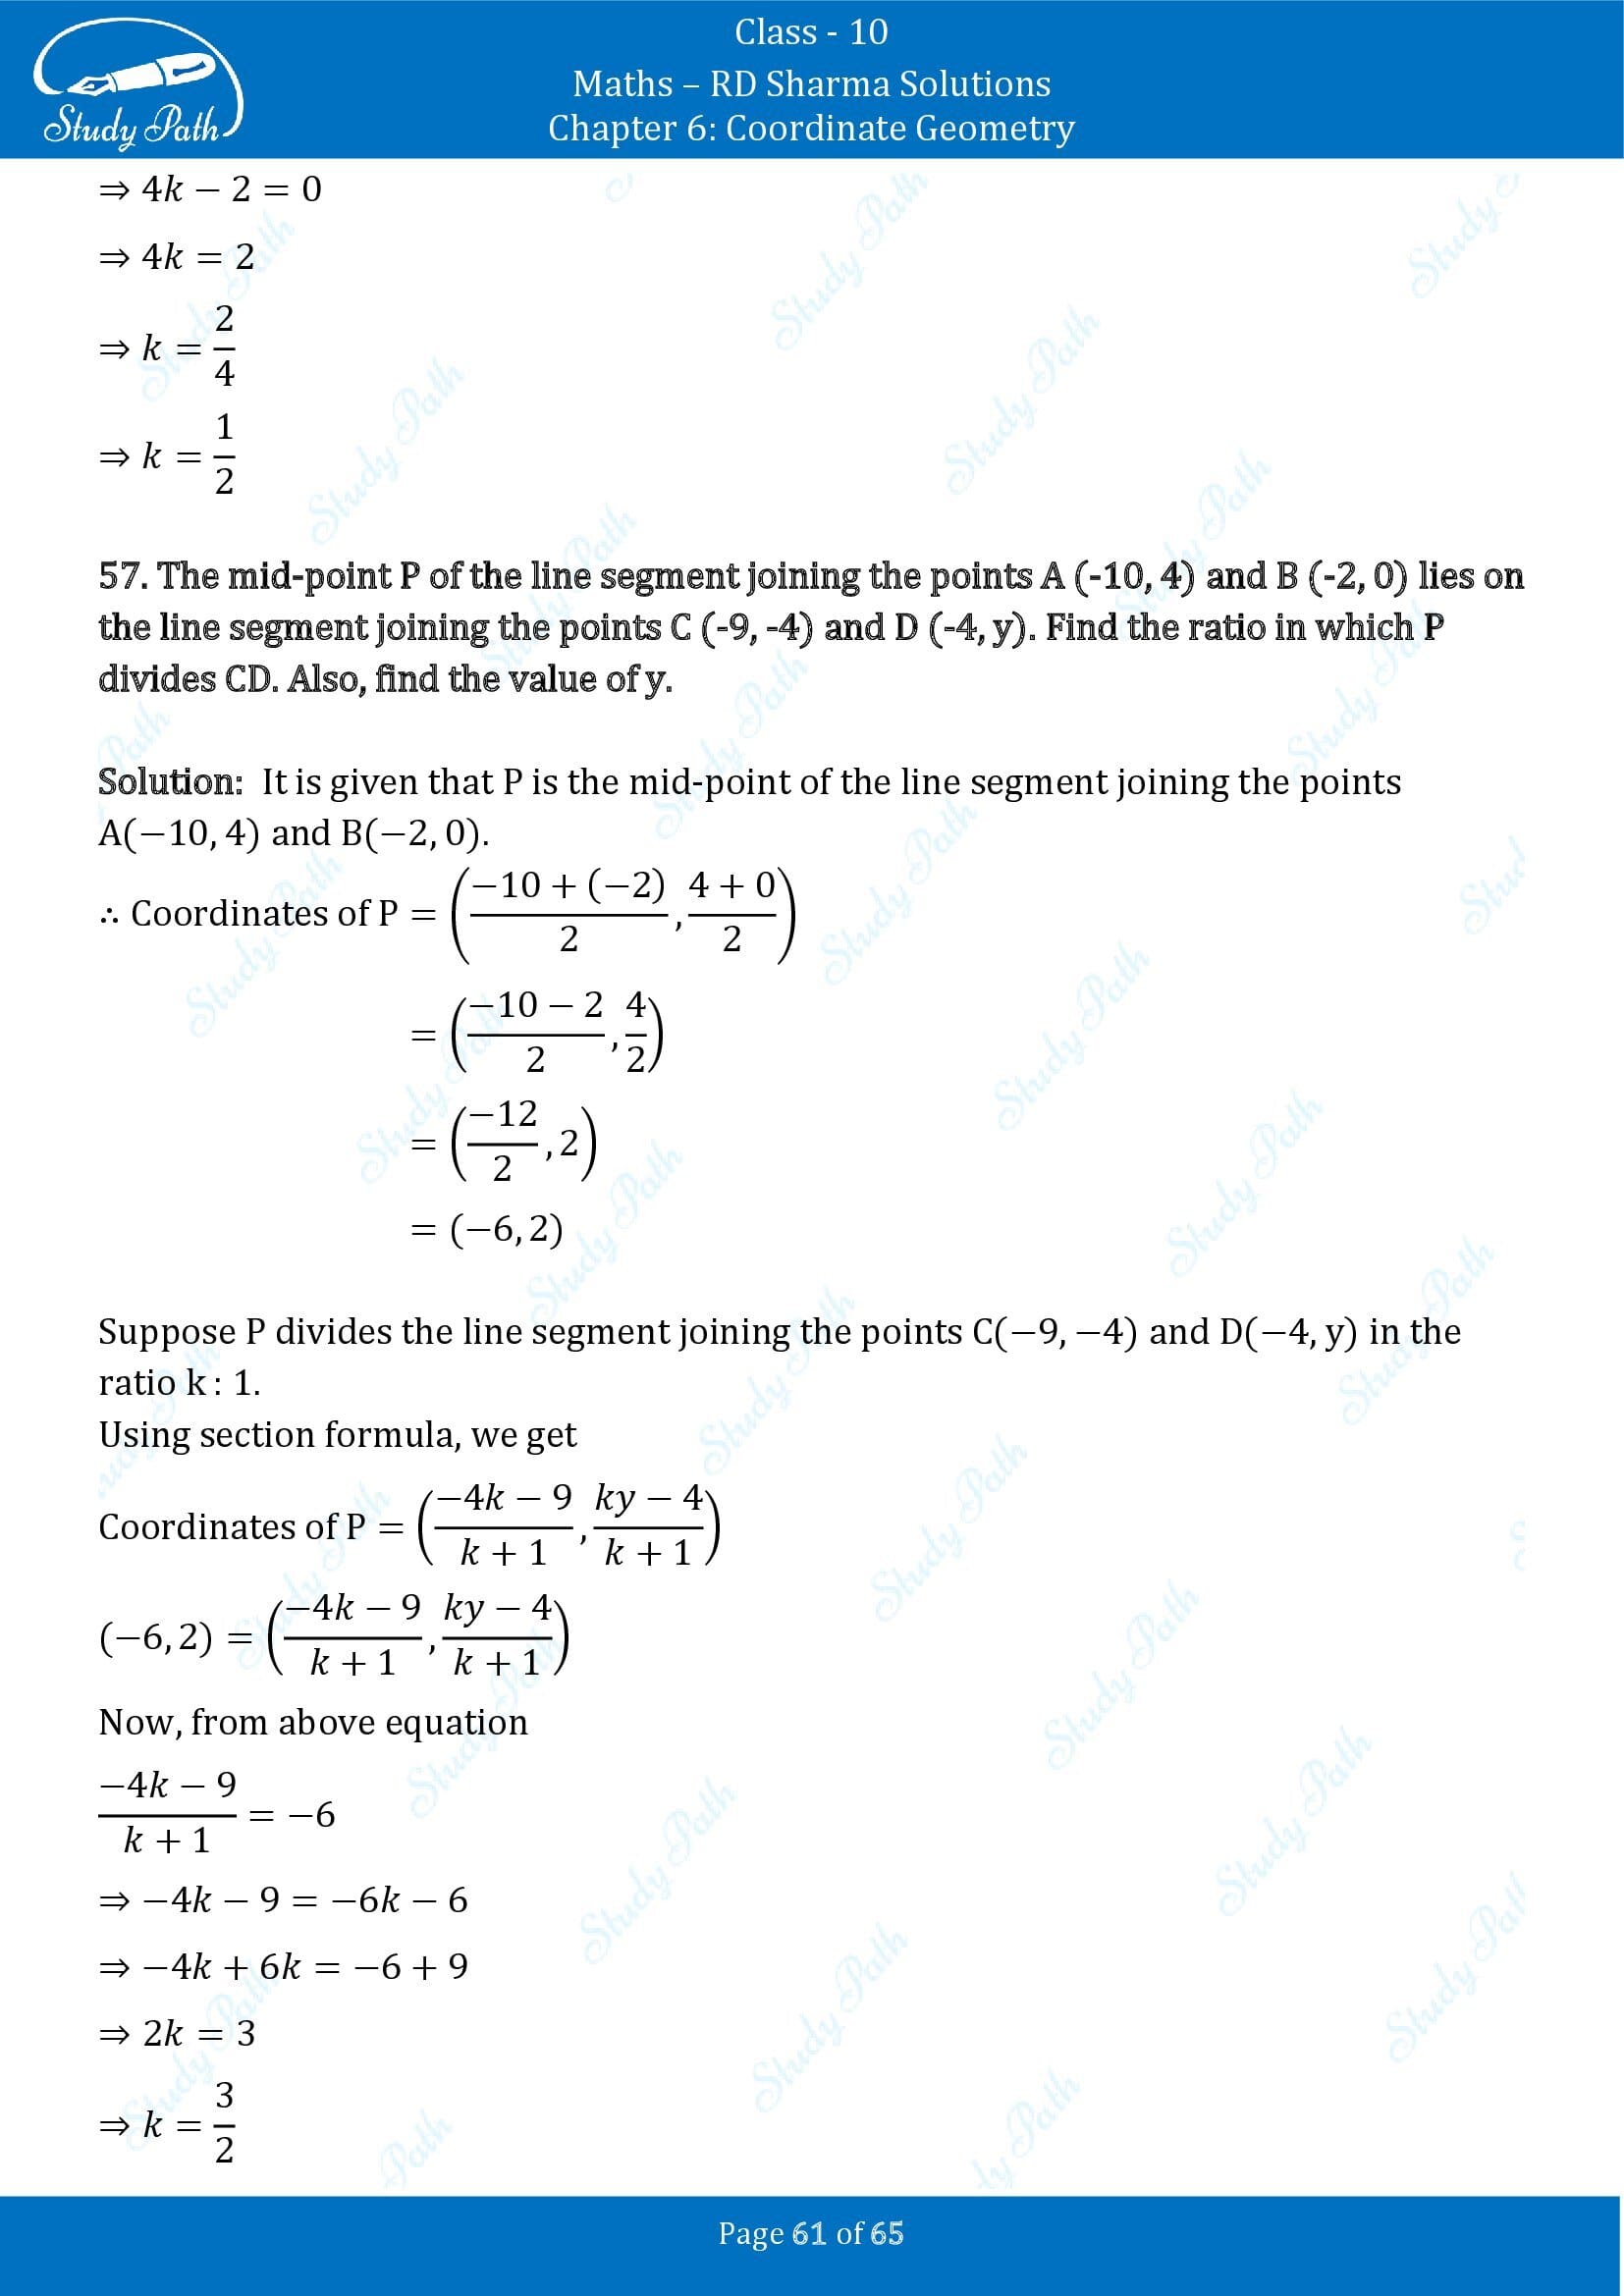 RD Sharma Solutions Class 10 Chapter 6 Coordinate Geometry Exercise 6.3 00061